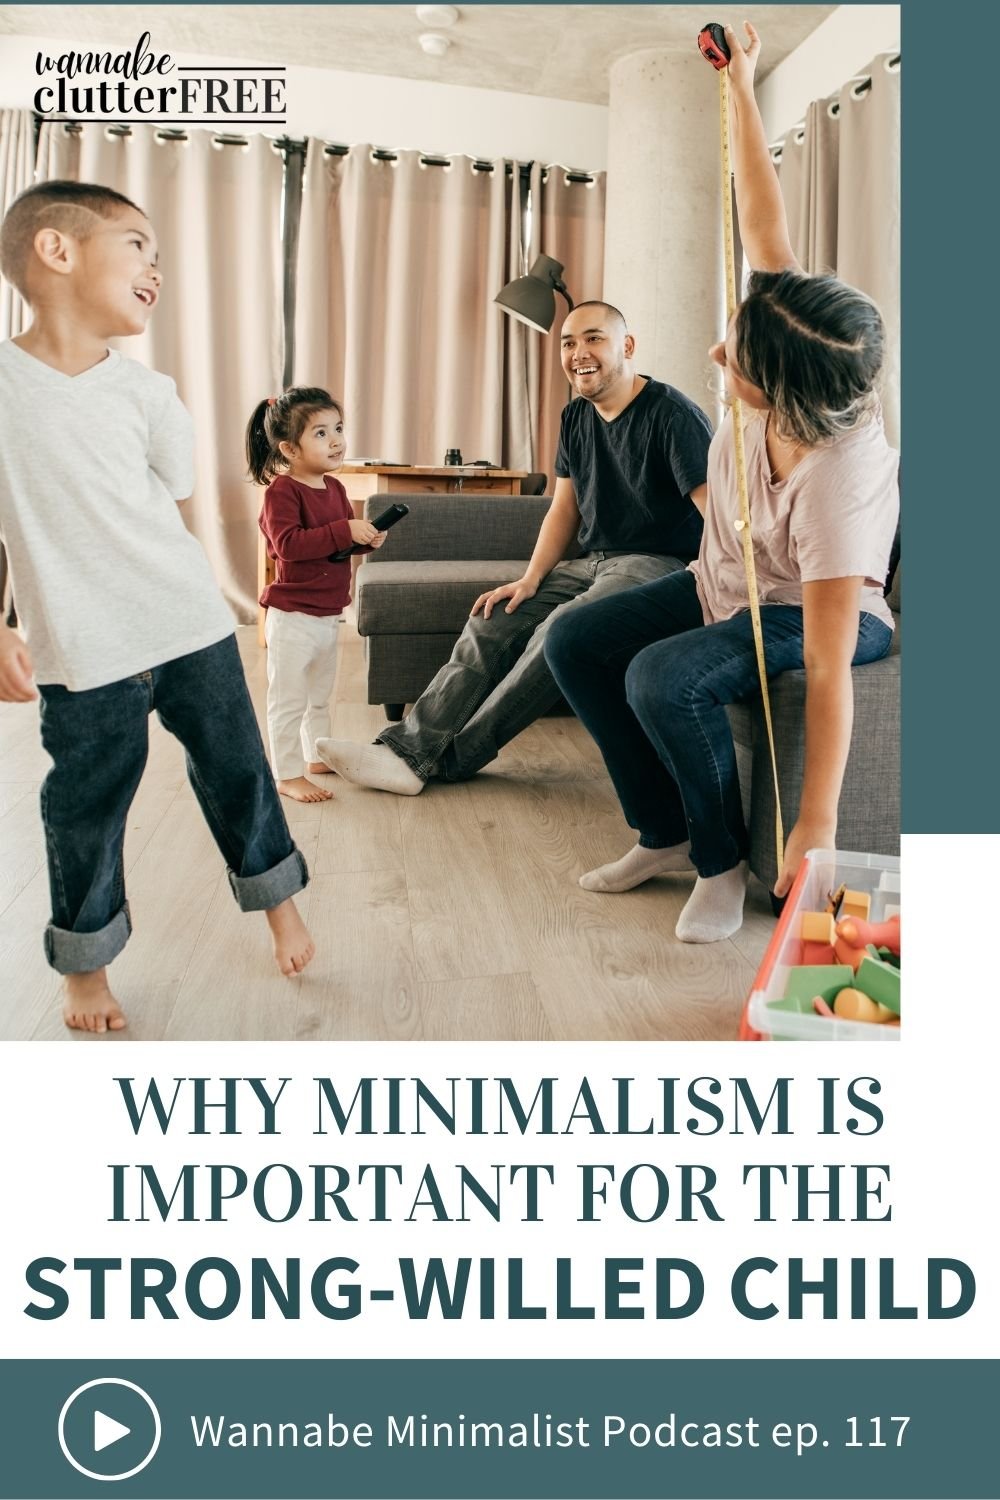 Why minimalism is important for the strong-willed child